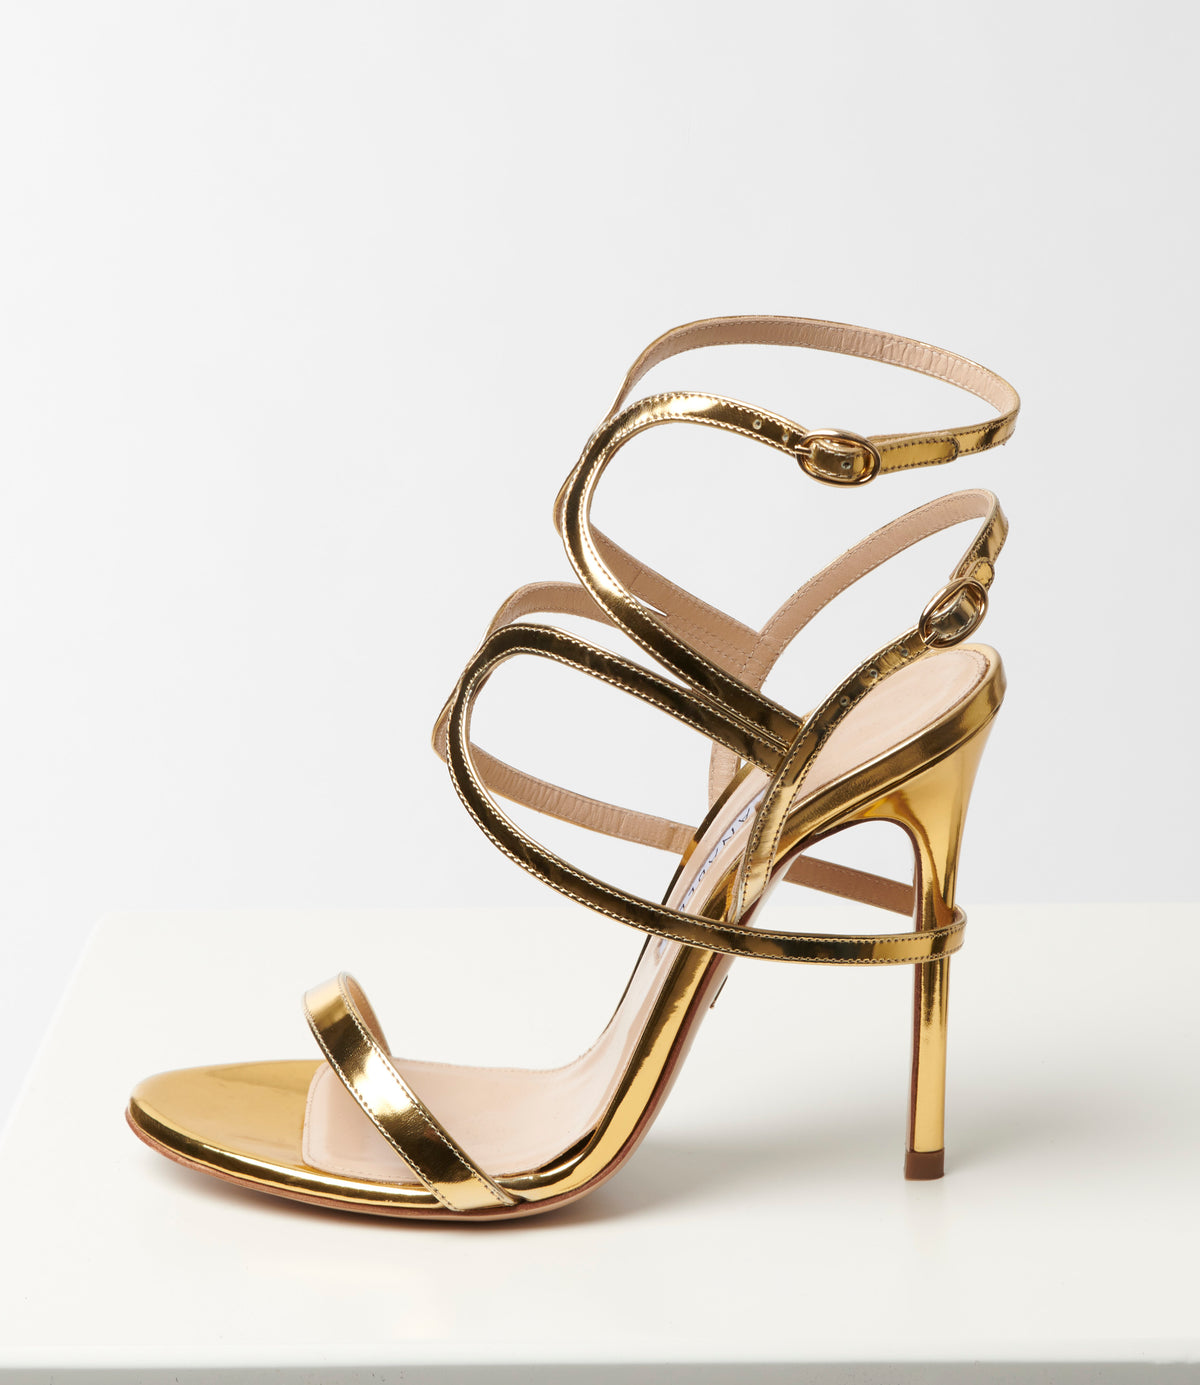 by Anabelle - Schuhe aus Leder  gold